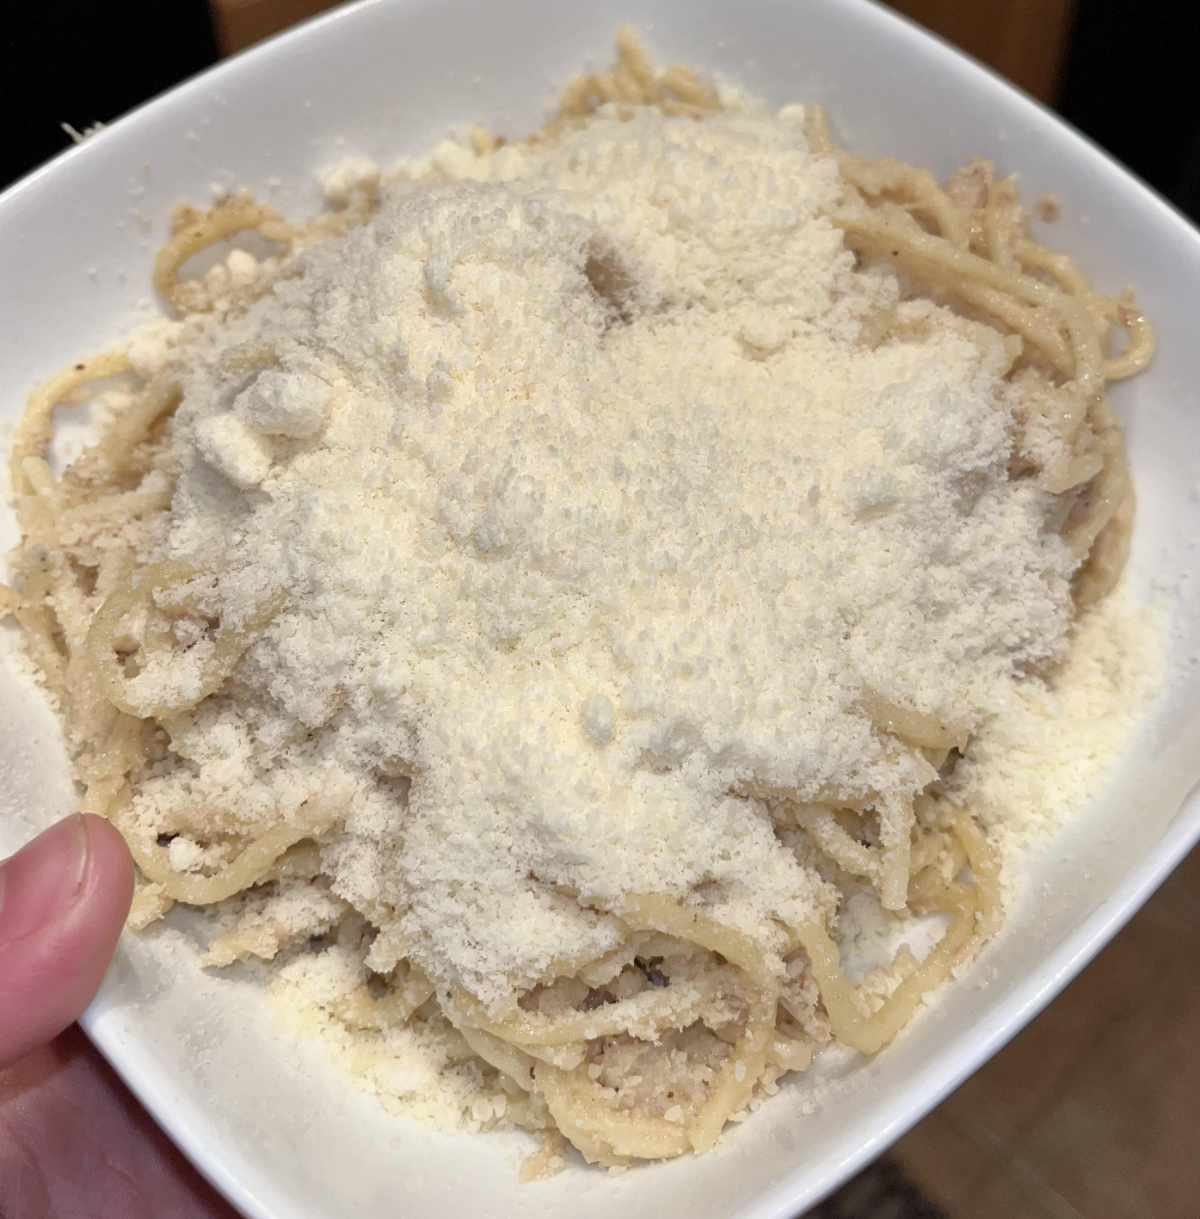 The amount of Parmesan my husband puts on his pasta